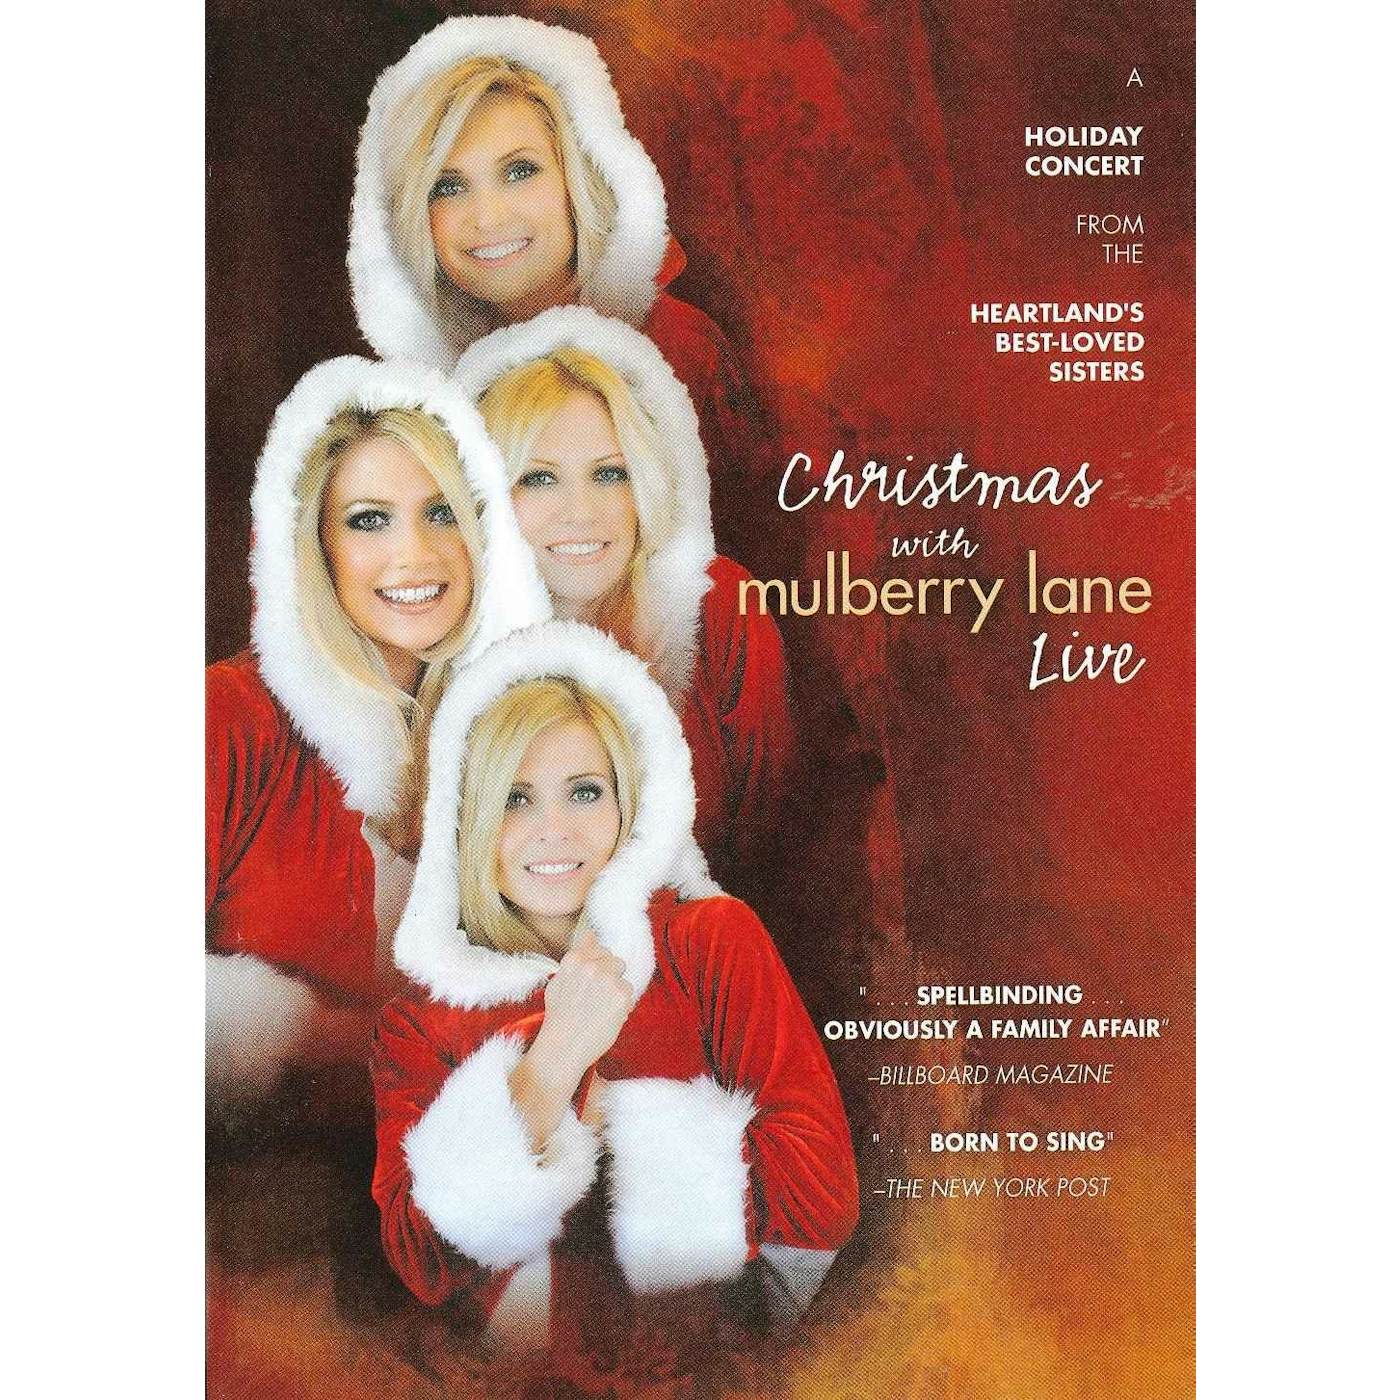 CHRISTMAS WITH MULBERRY LANE: LIVE DVD